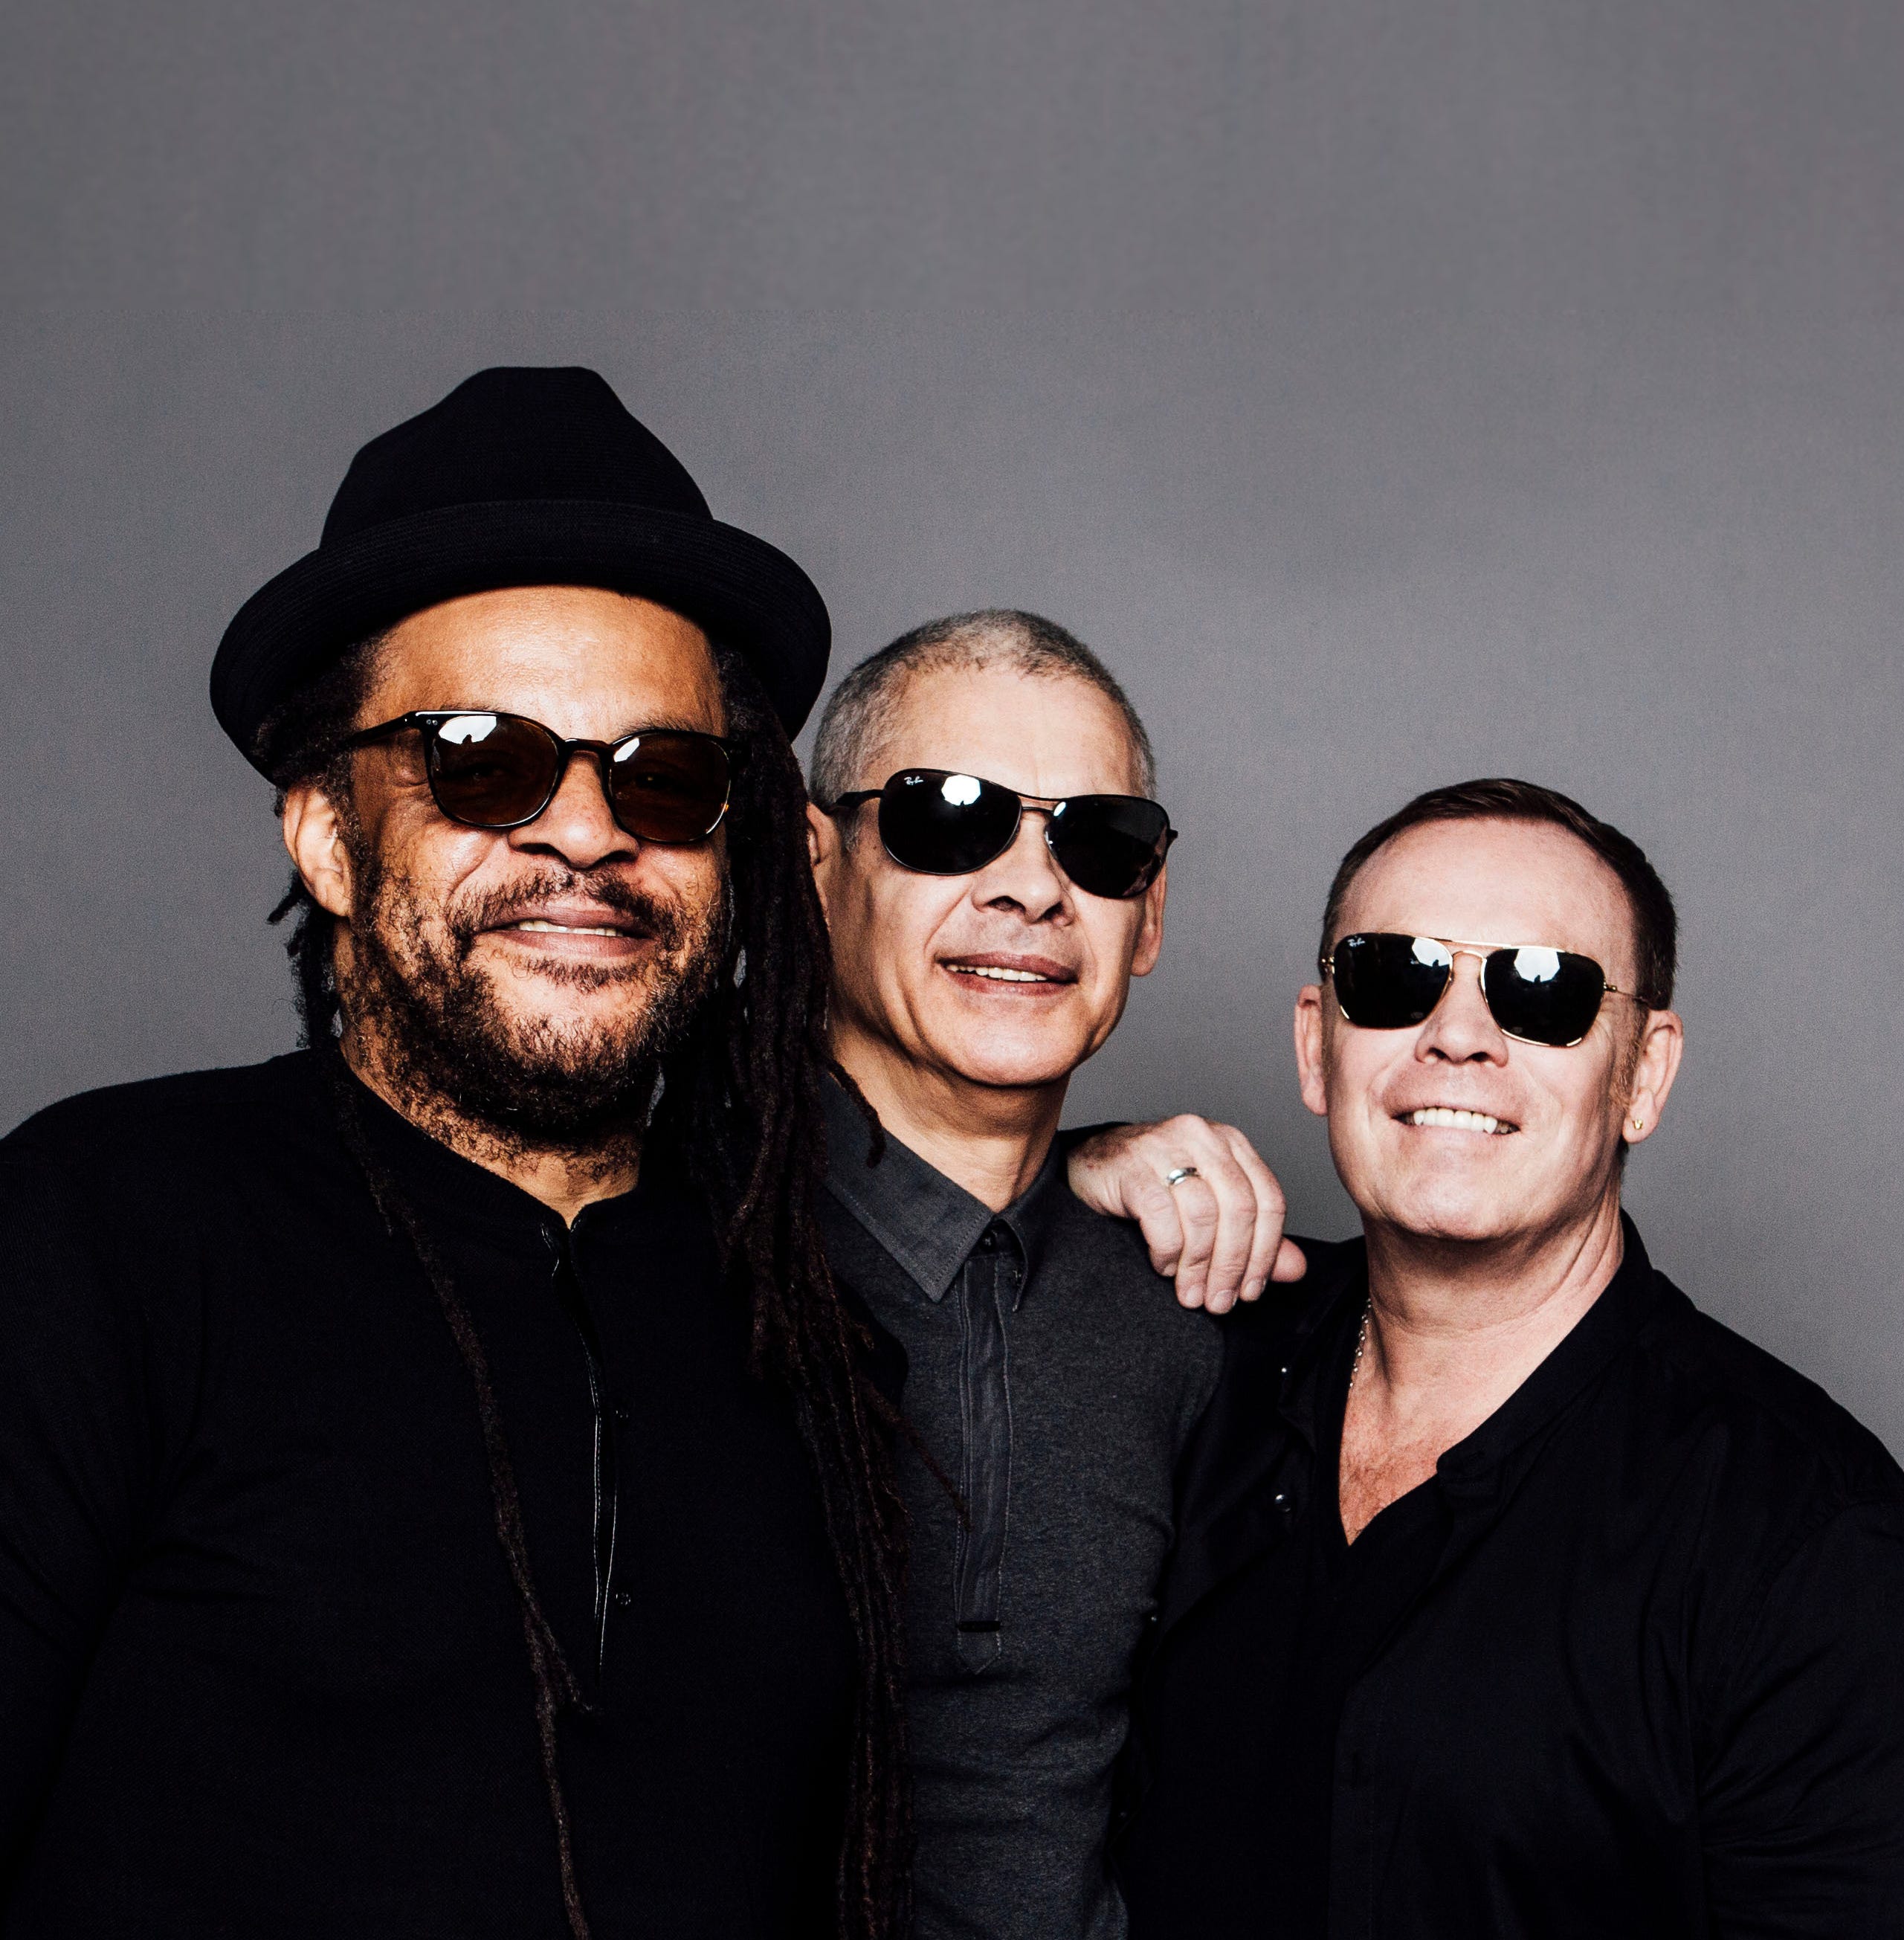 For your visual reference, here are the founding members of UB40: Astro (left), Mickey Virtue and Ali Campbell.